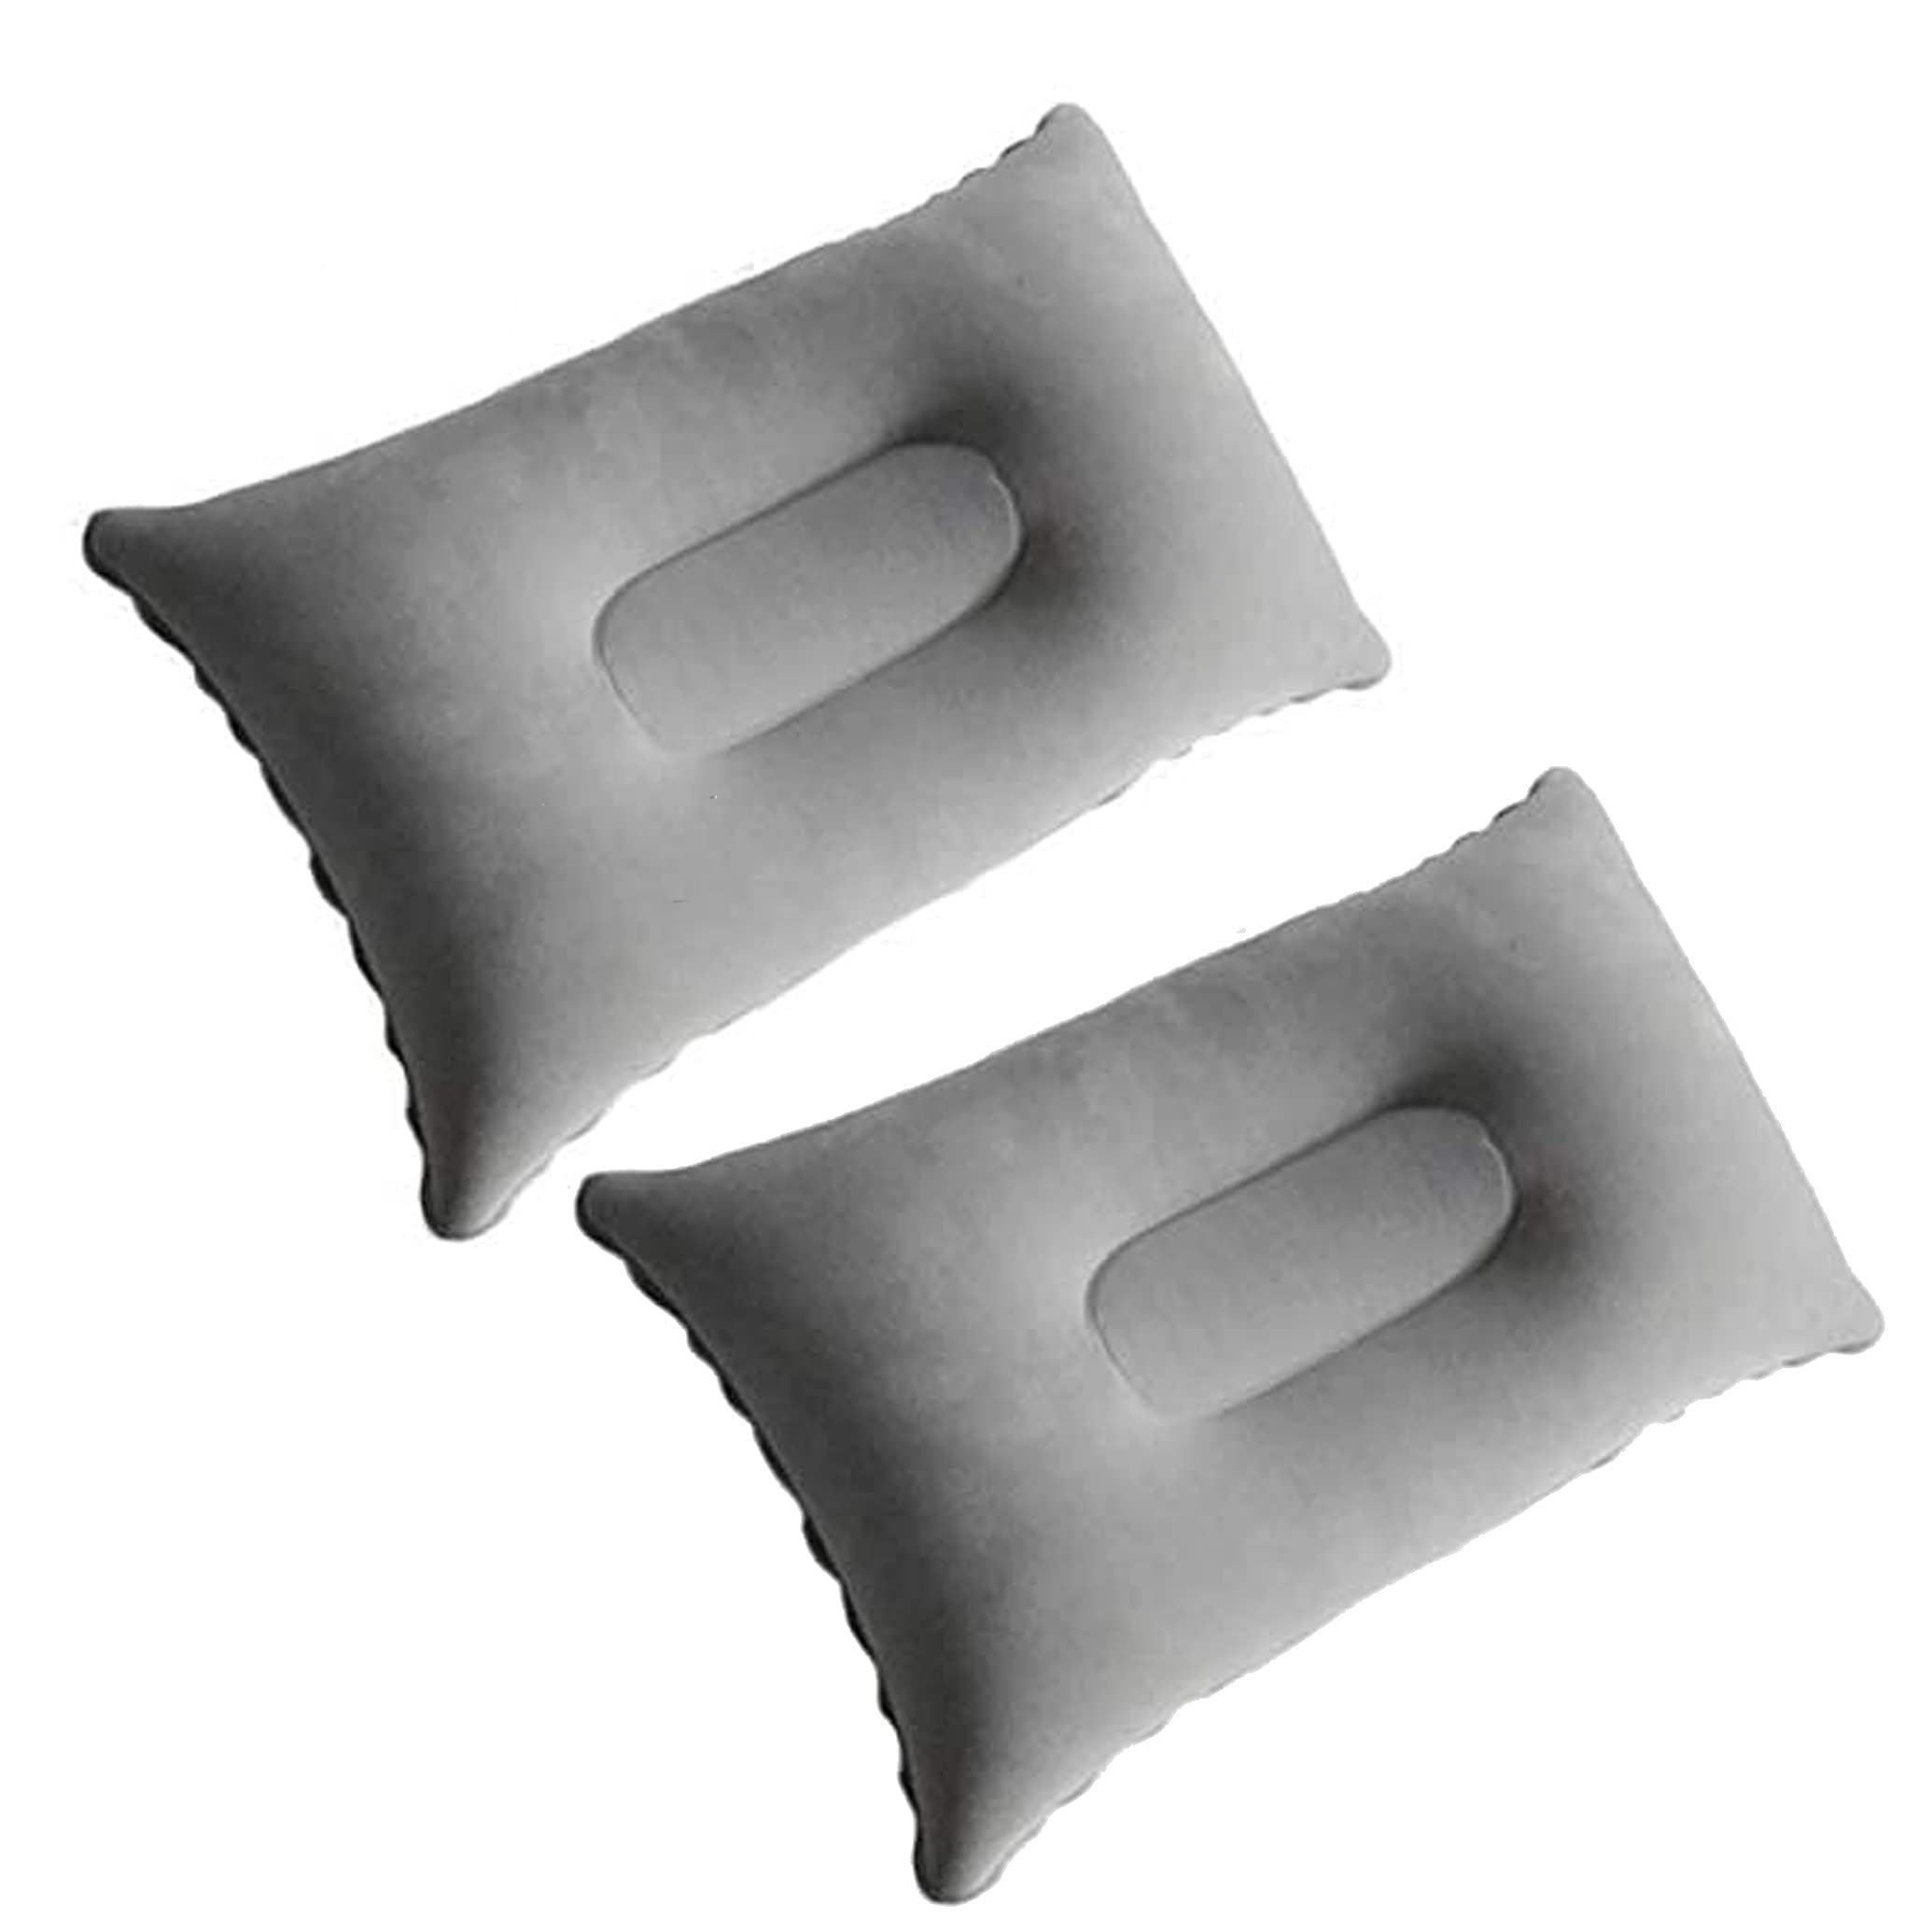 Dogxiong 2 Pack Ultralight Inflatable Pillow Small Squared Flocked